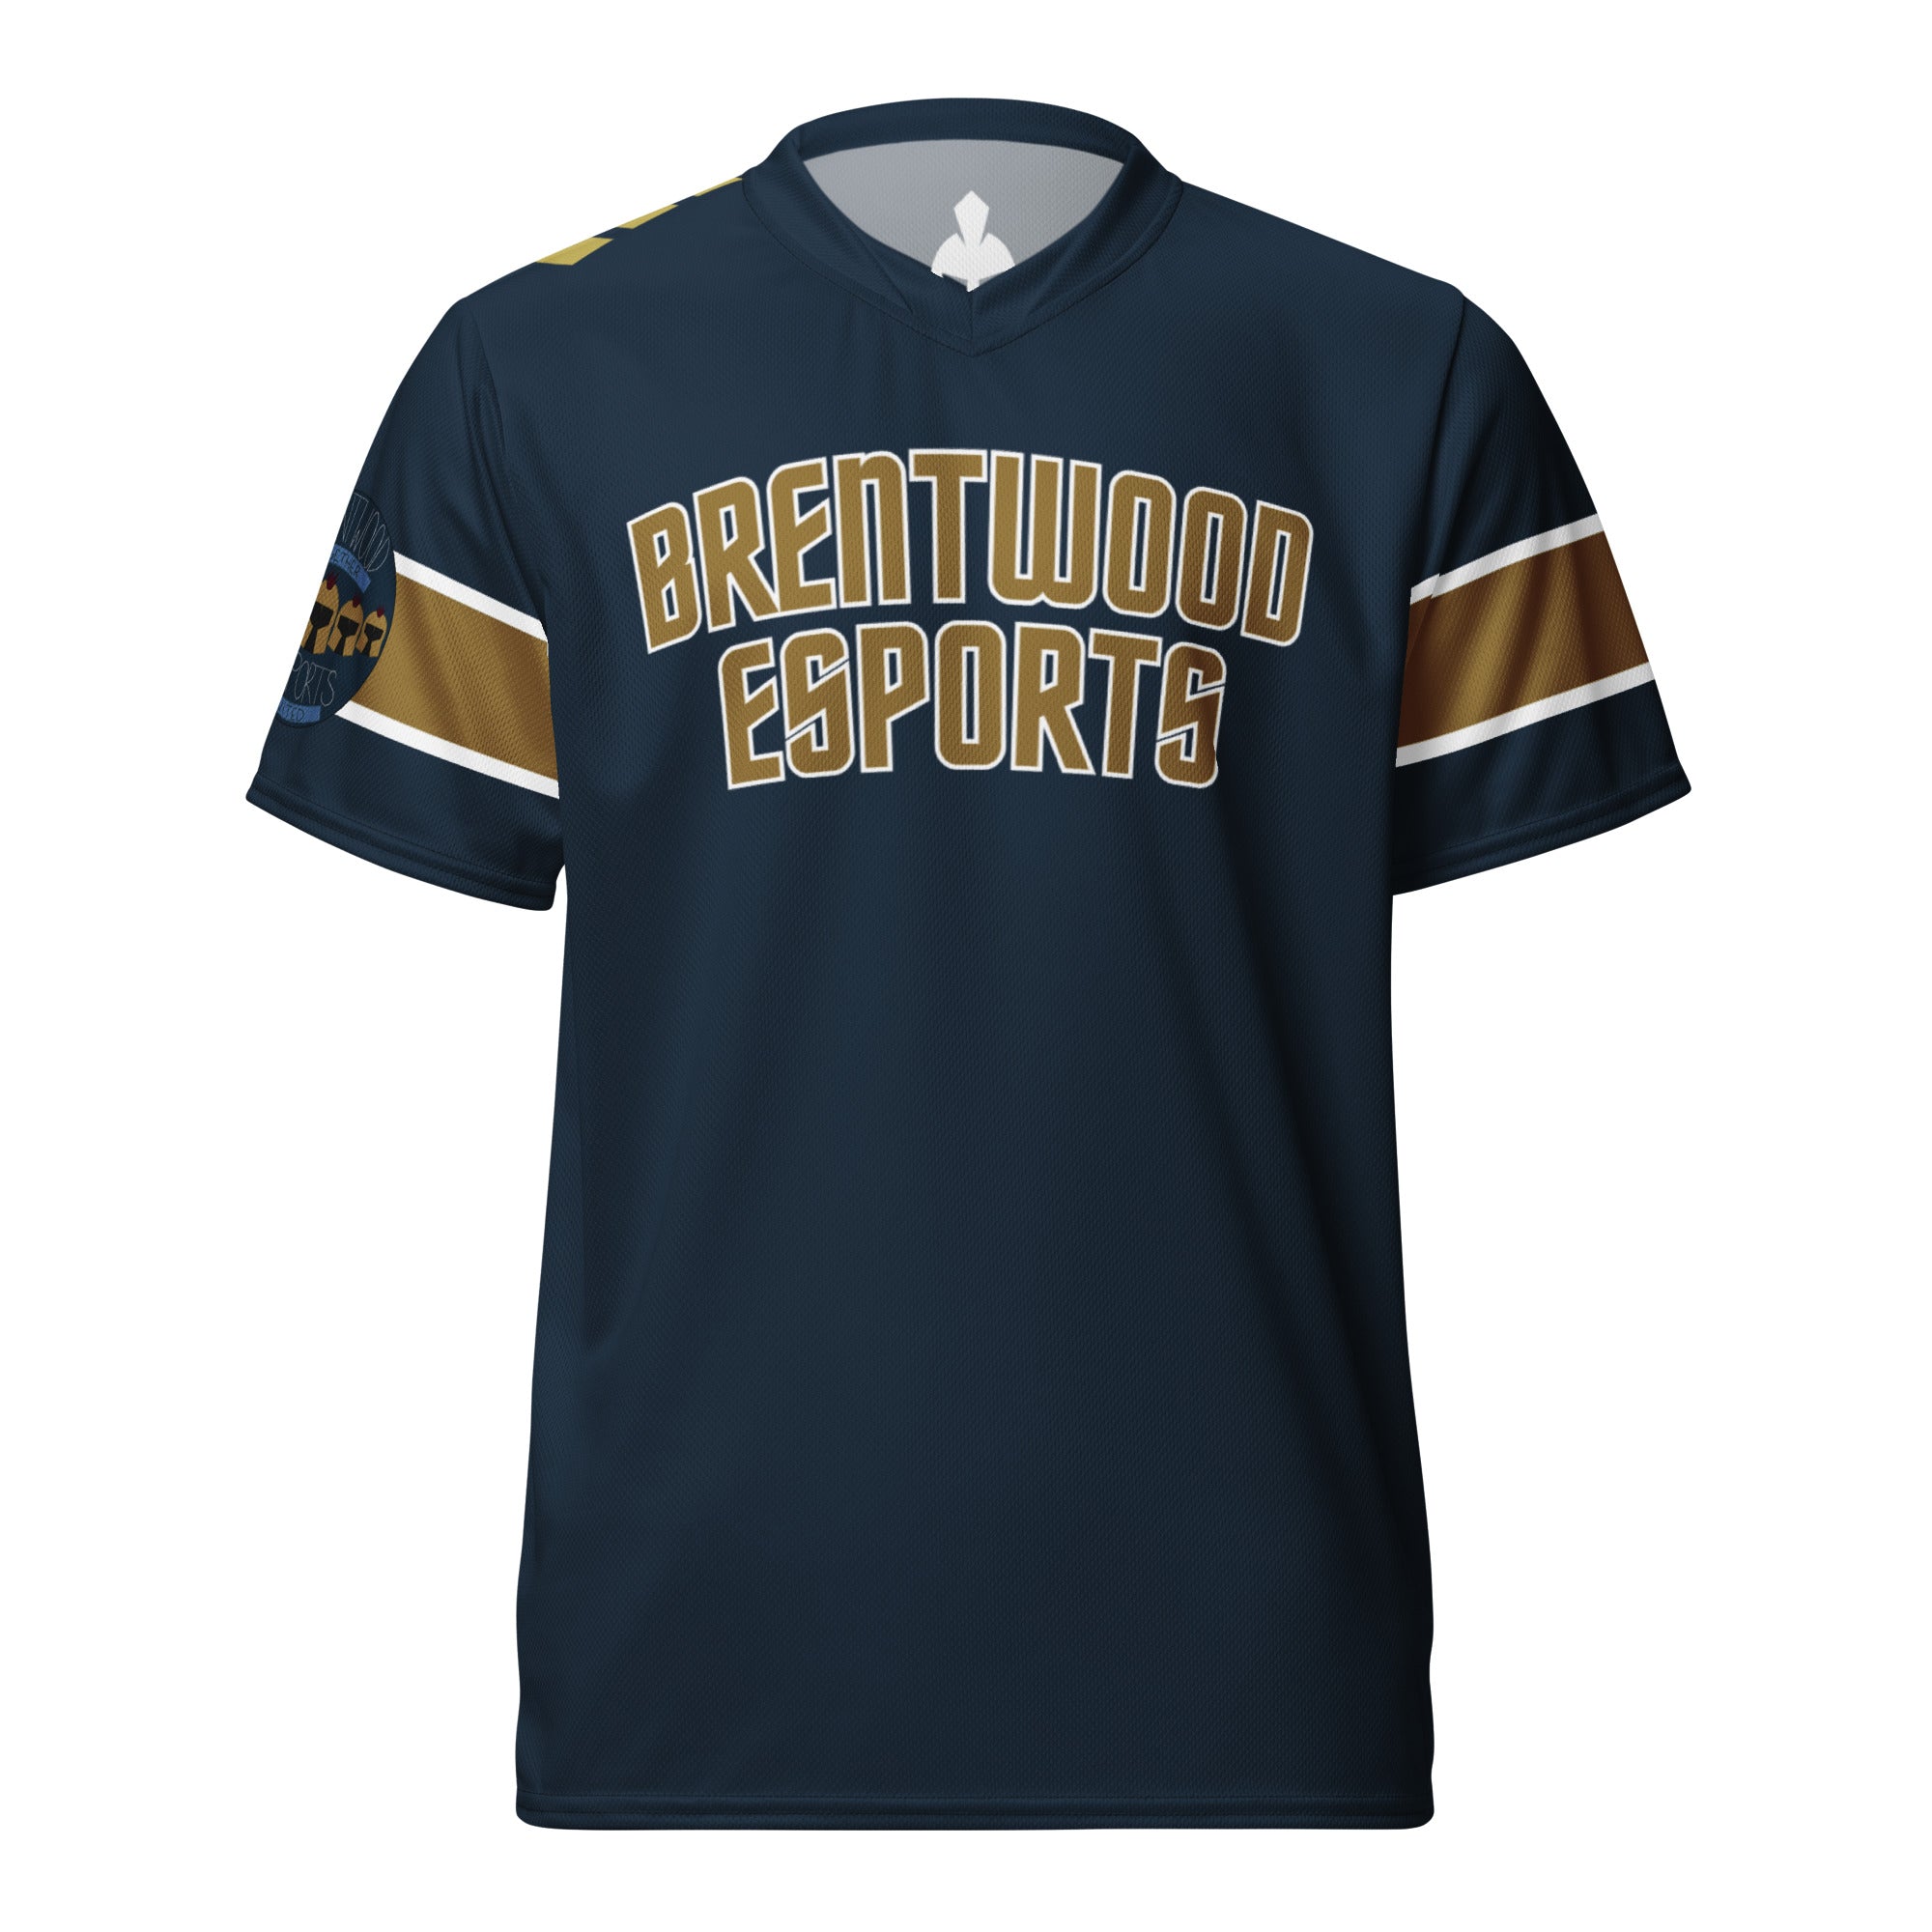 Brentwood Esports Jersey